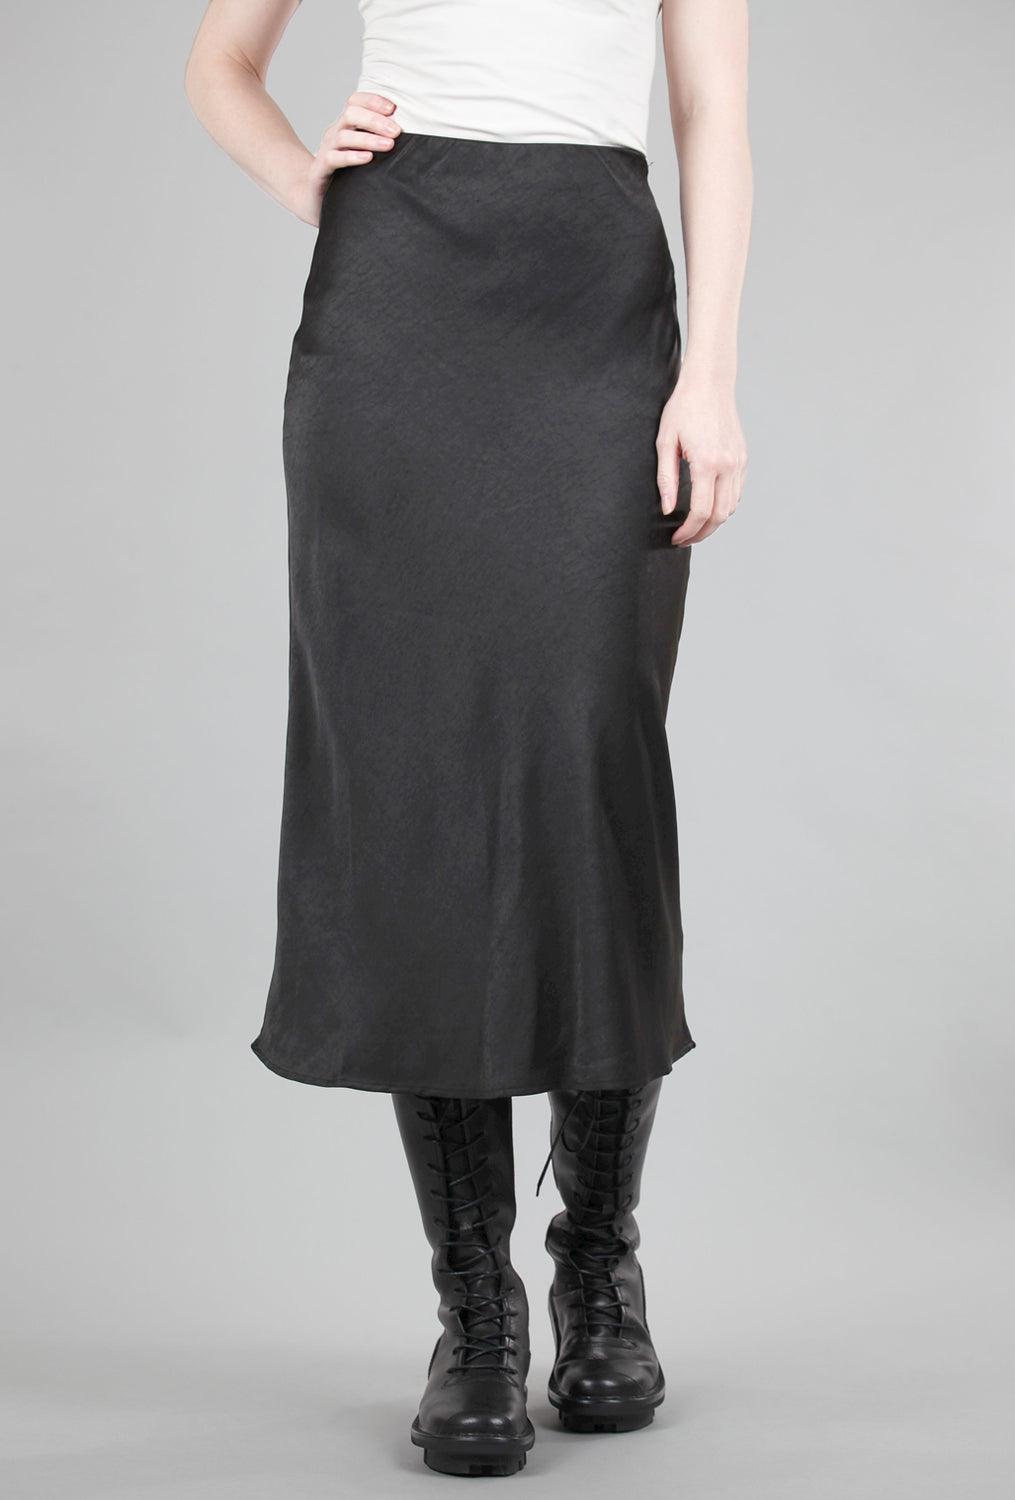 By Together Sateen Bias Skirt, Black 